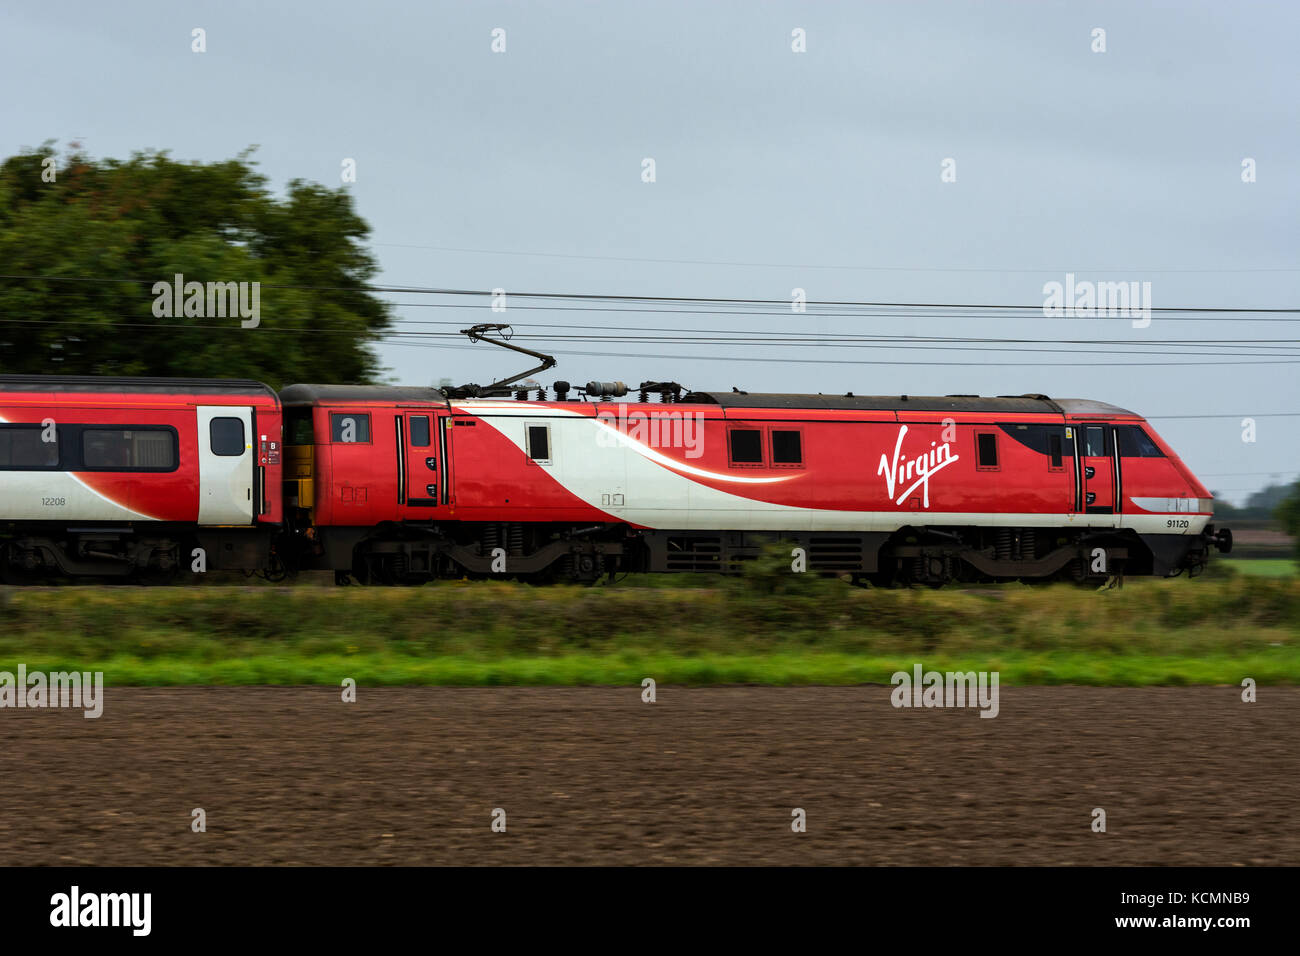 Virgin Trains electric train at speed on the East Coast Main Line, Nottinghamshire, England, UK Stock Photo